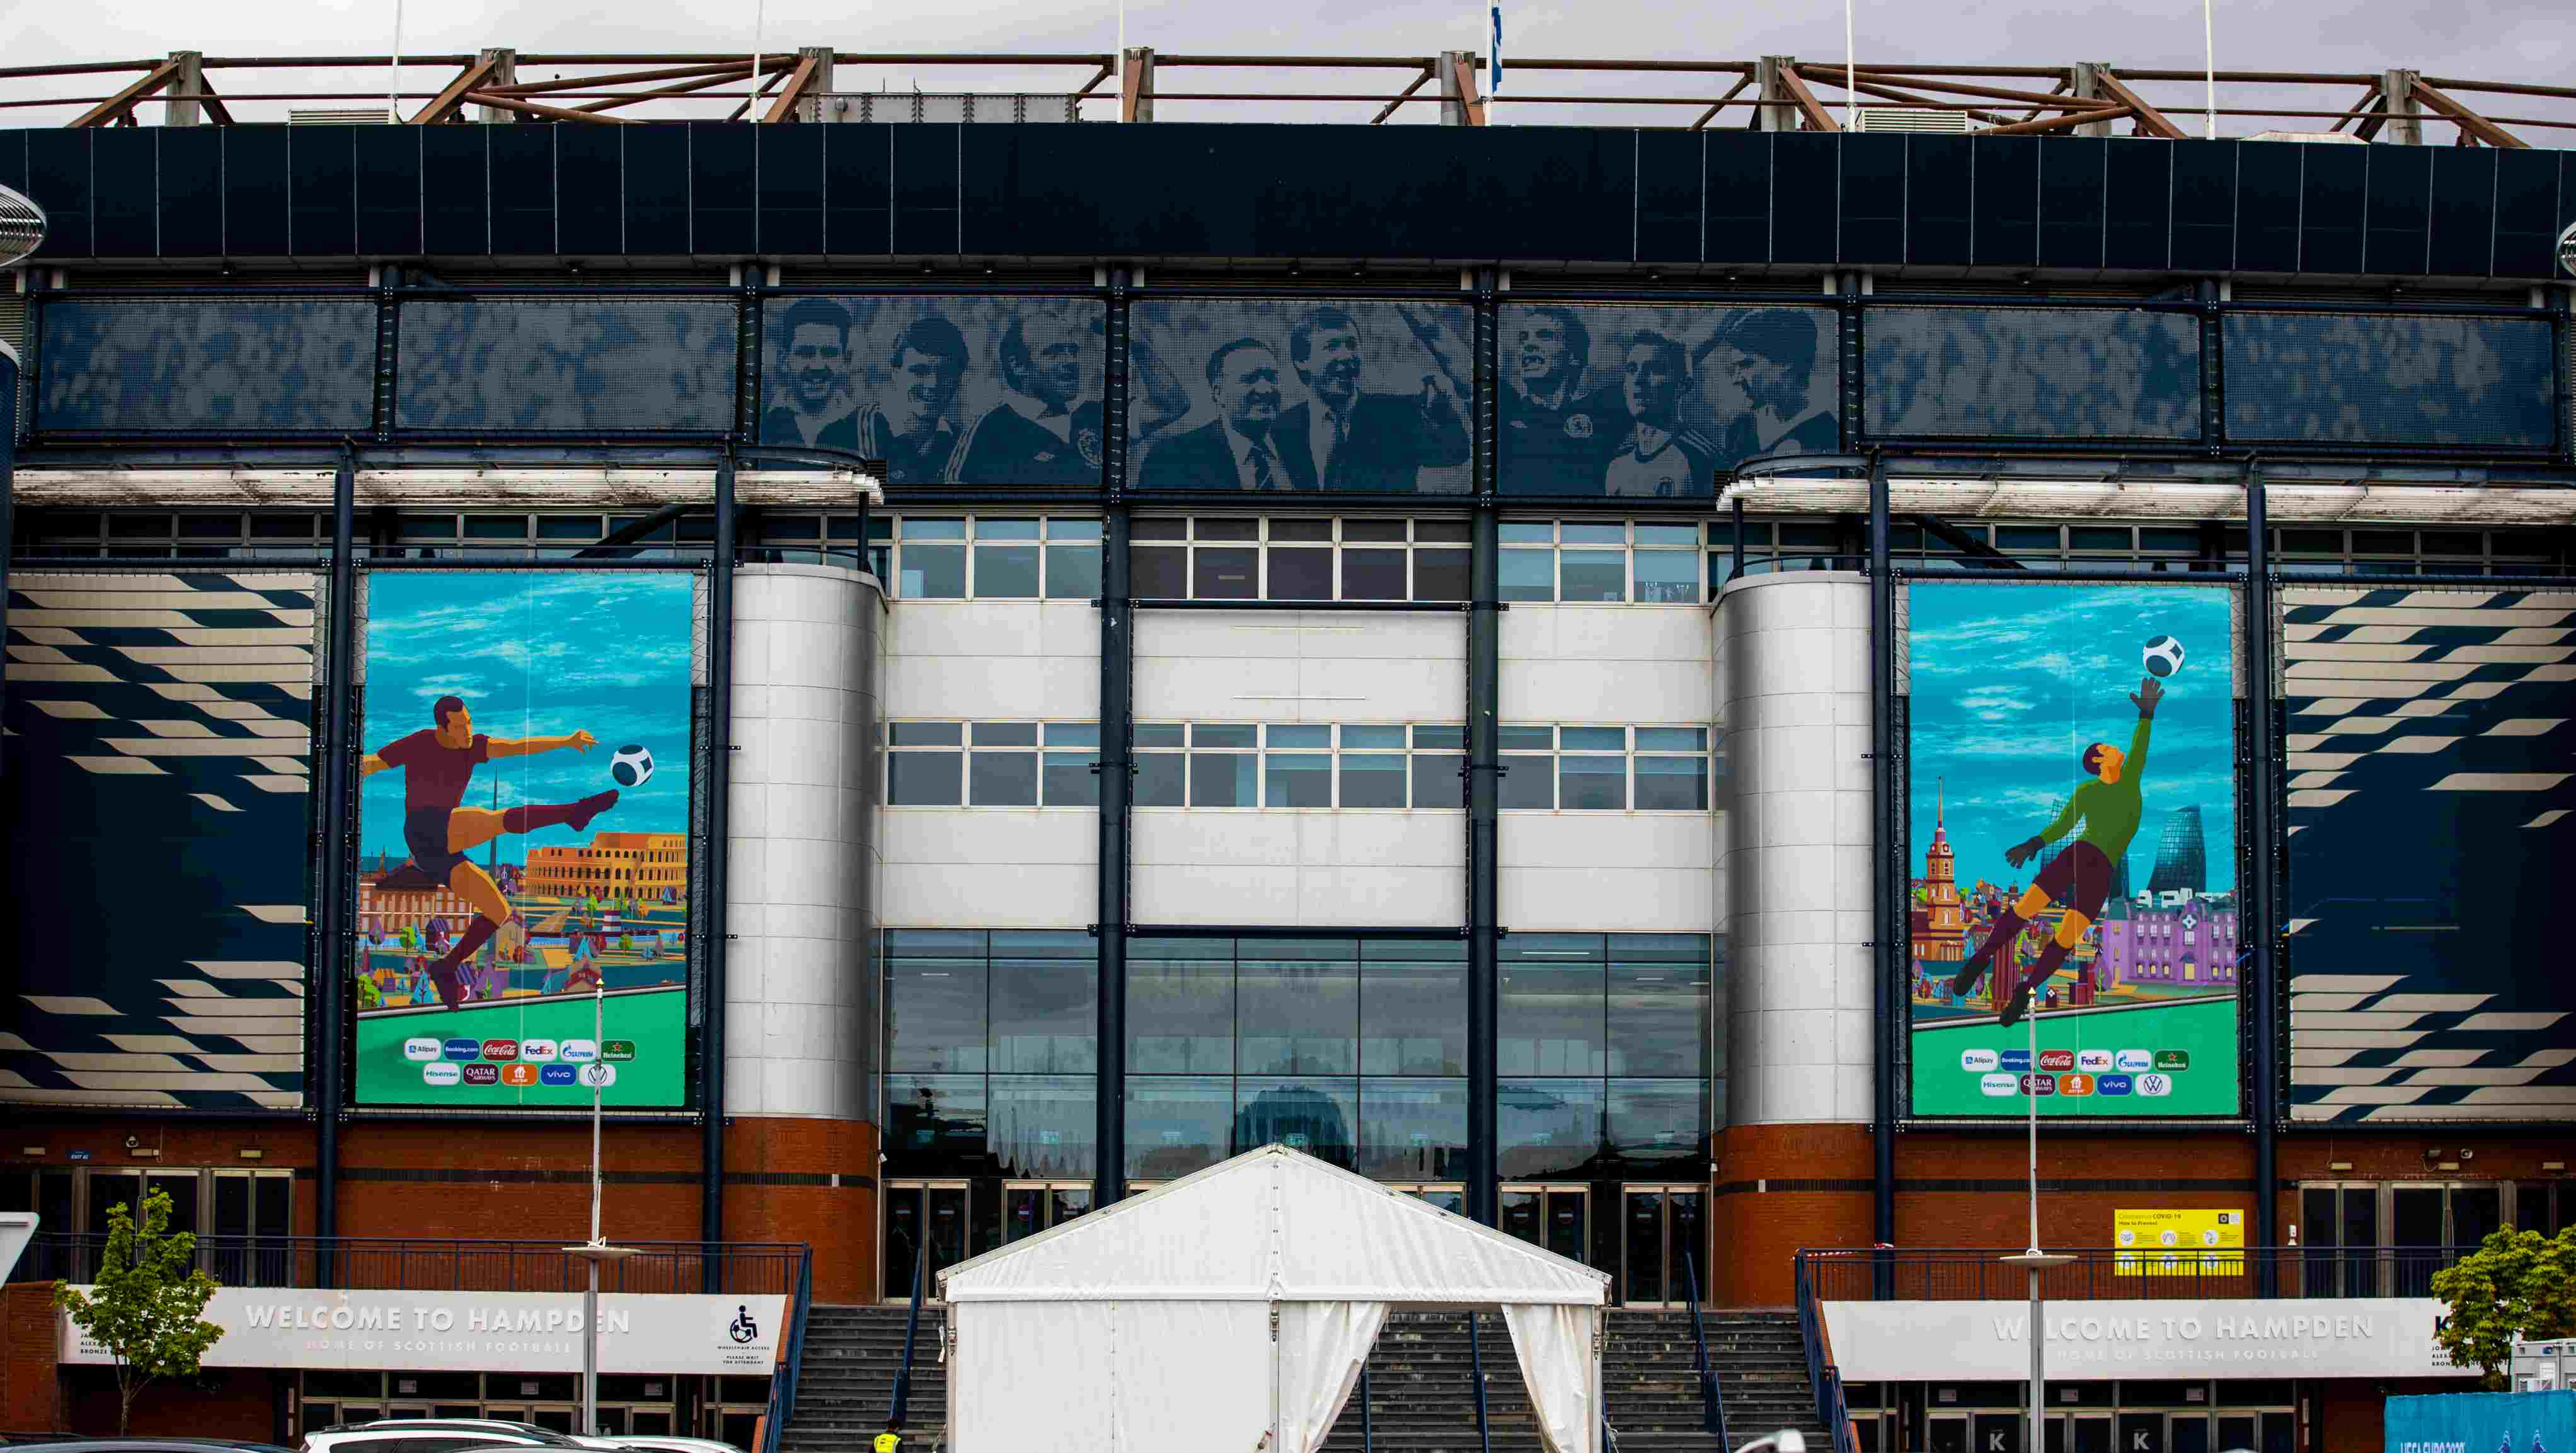 GEuro 2020 branding is displayed outside of Hampden Stadium ahead of this summer's European Championships in Glasgow on May 26, 2021, in Glasgow, Scotland. (Photo by Craig Williamson / SNS Group)